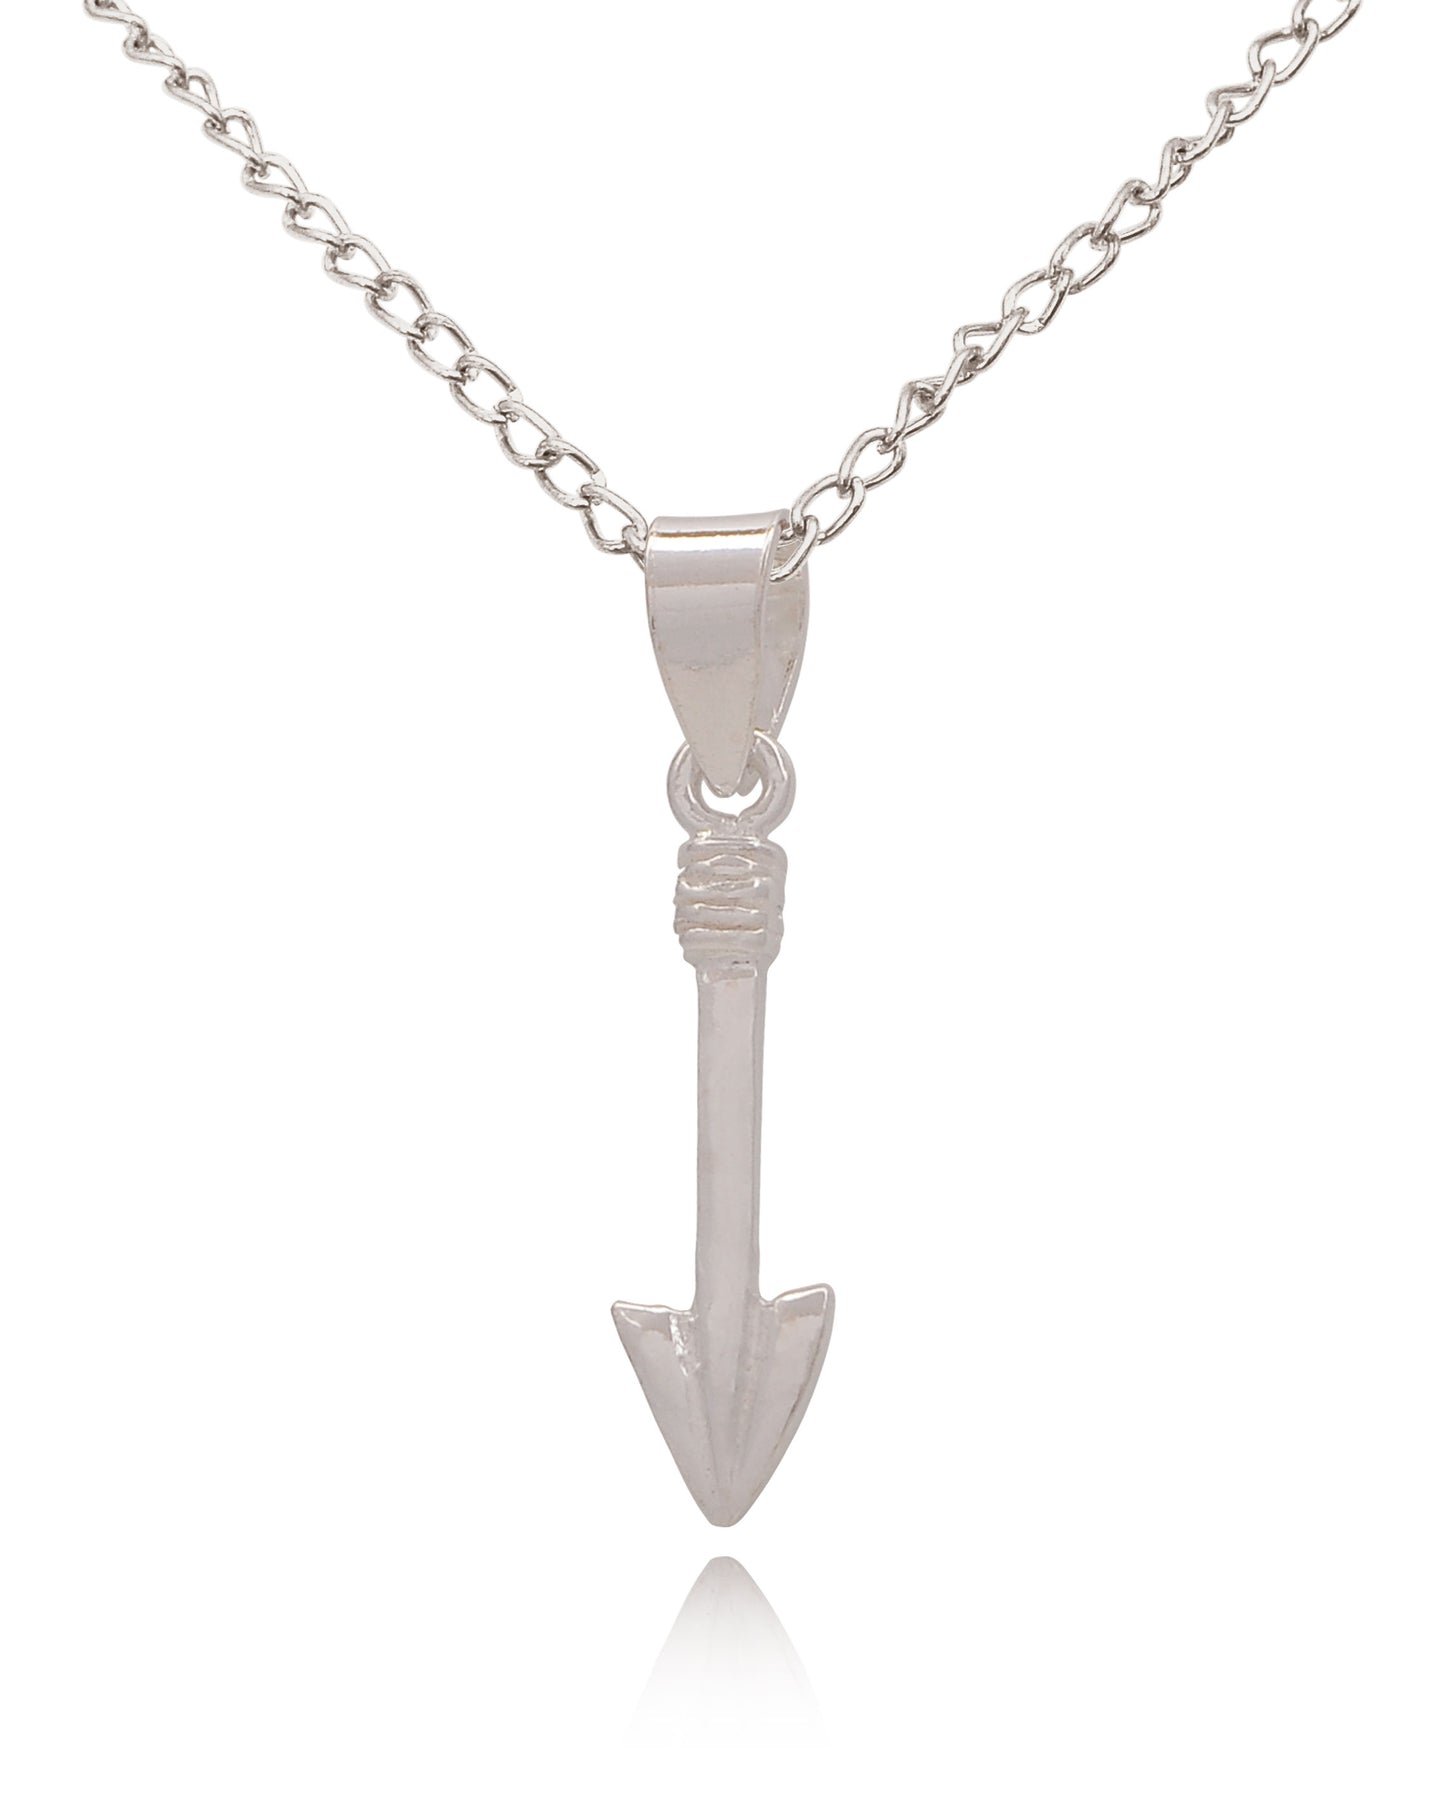 Cute Cupid's Arrow Sterling Silver Brass Charm Necklace Pendant Jewelry